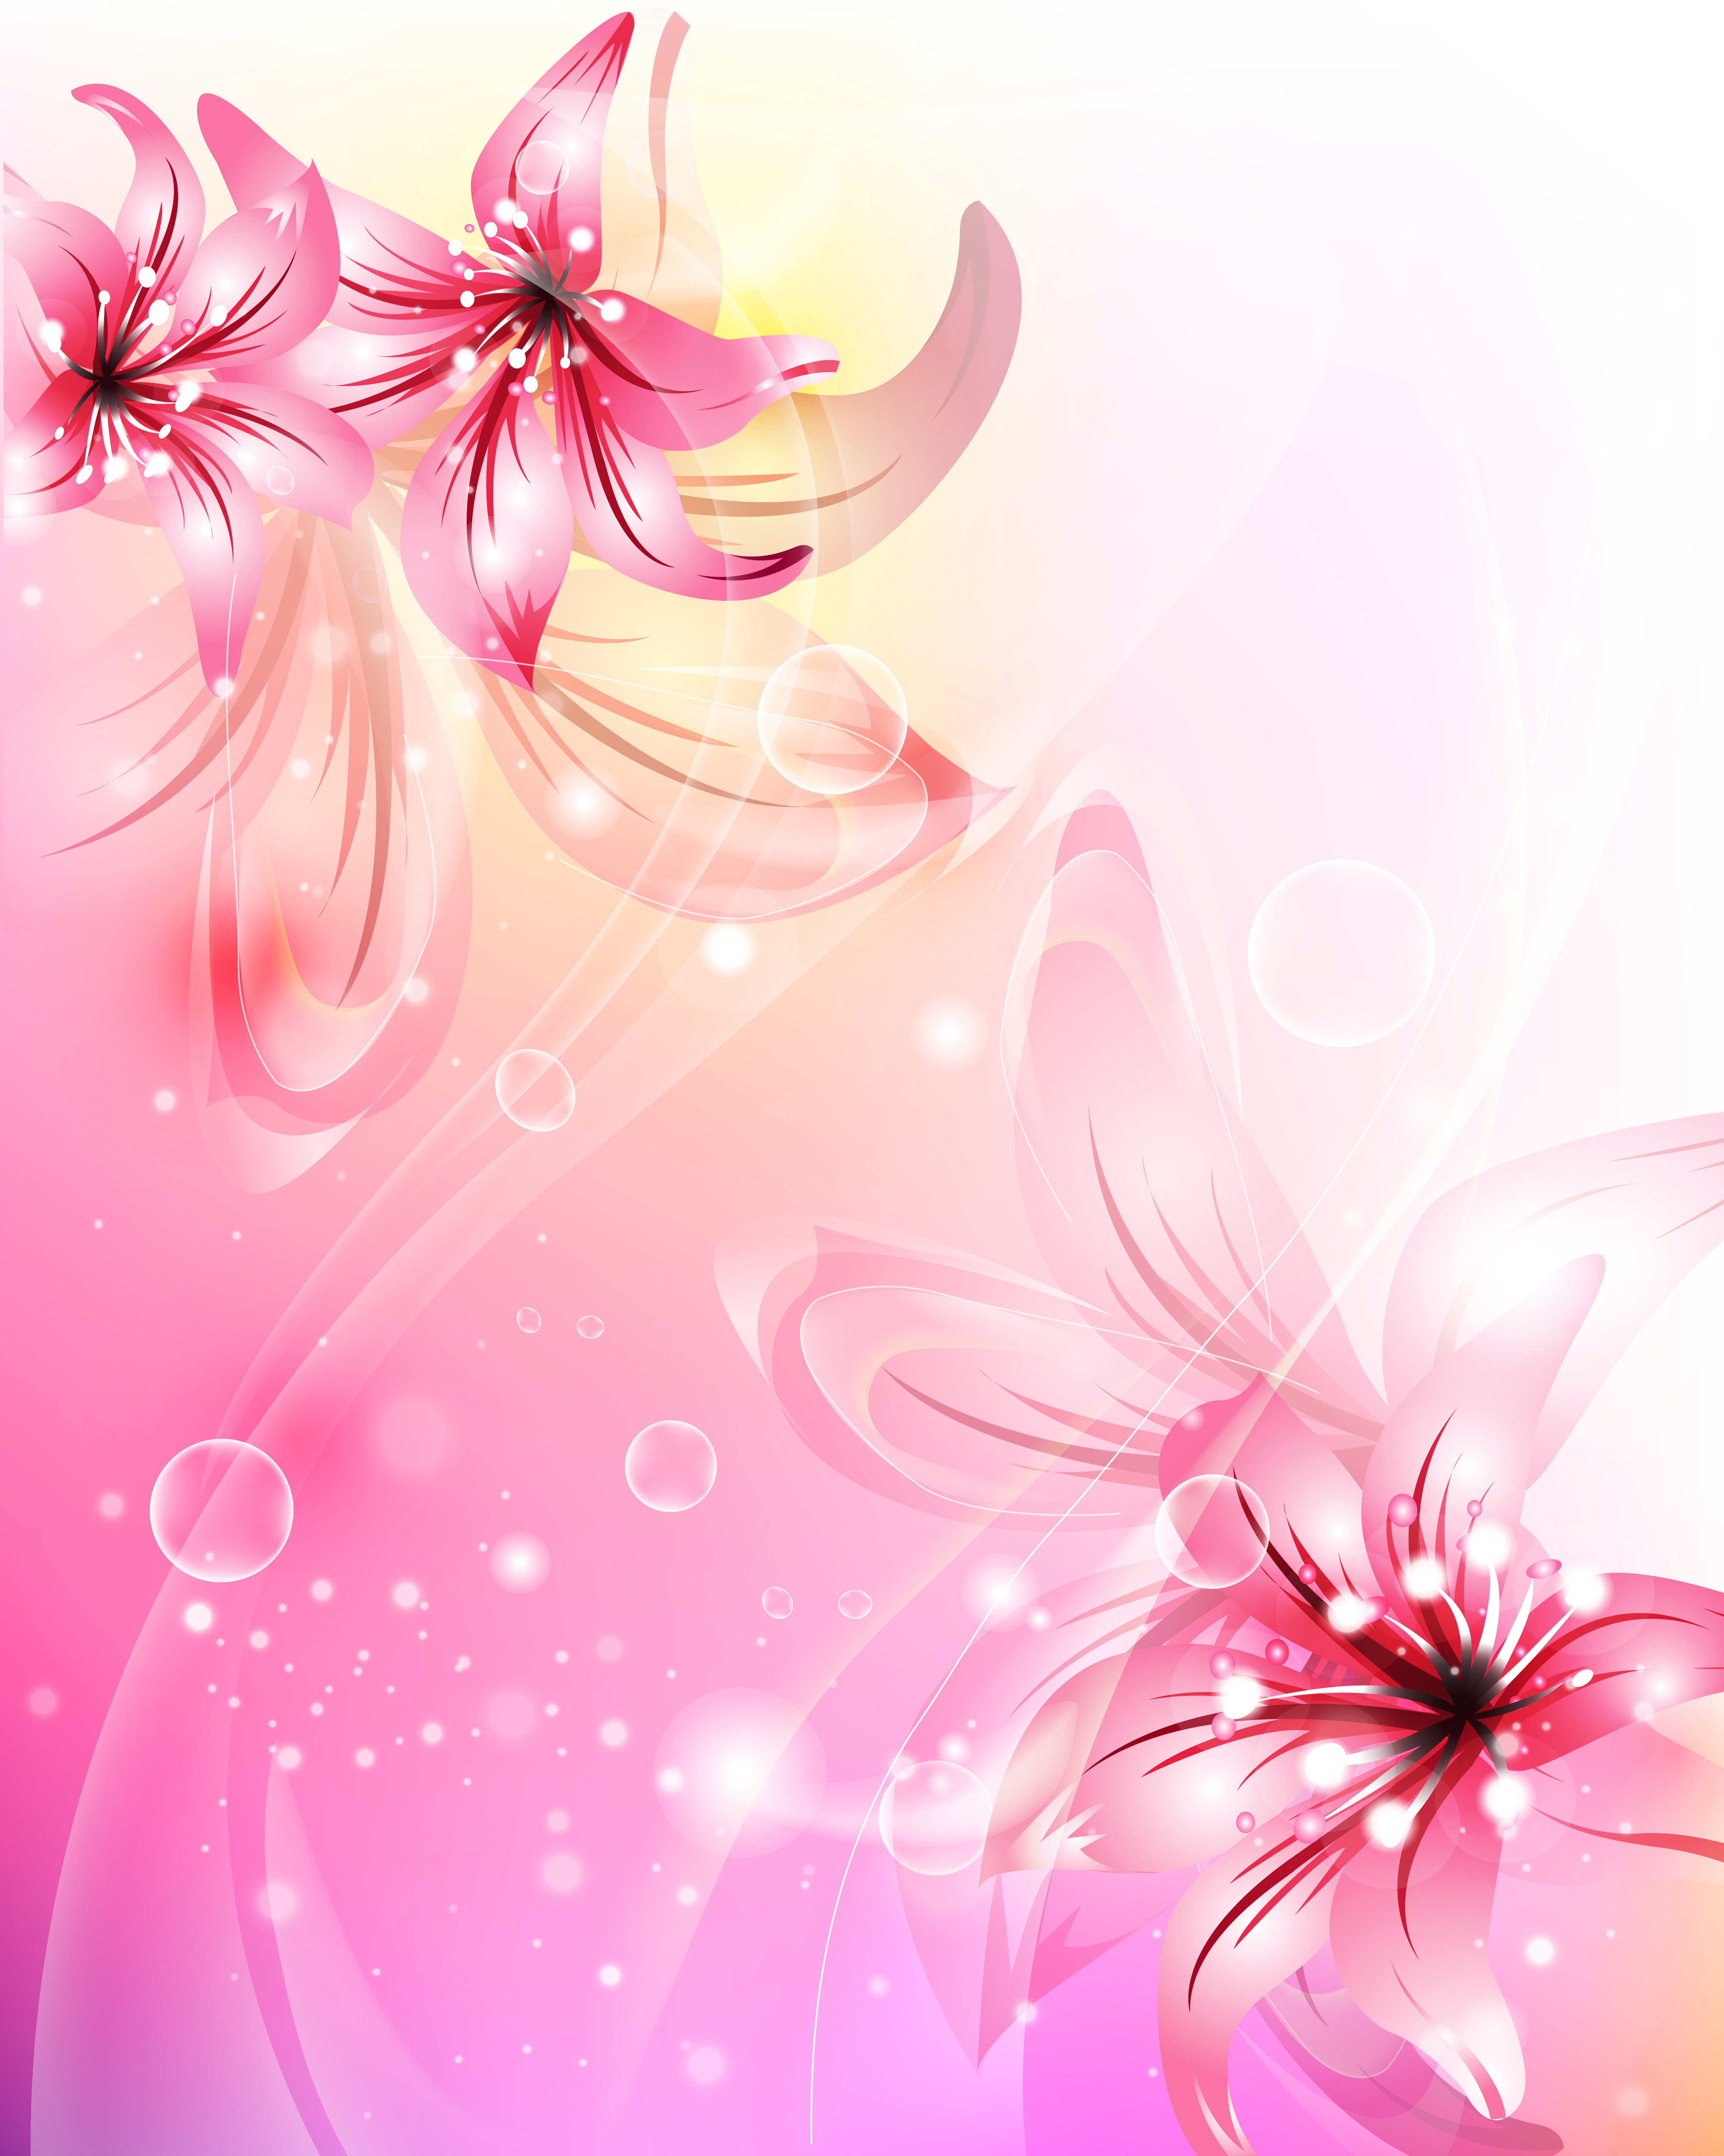 Flowers Backgrounds | HD Background Images | Photos | Pictures | YL Computing